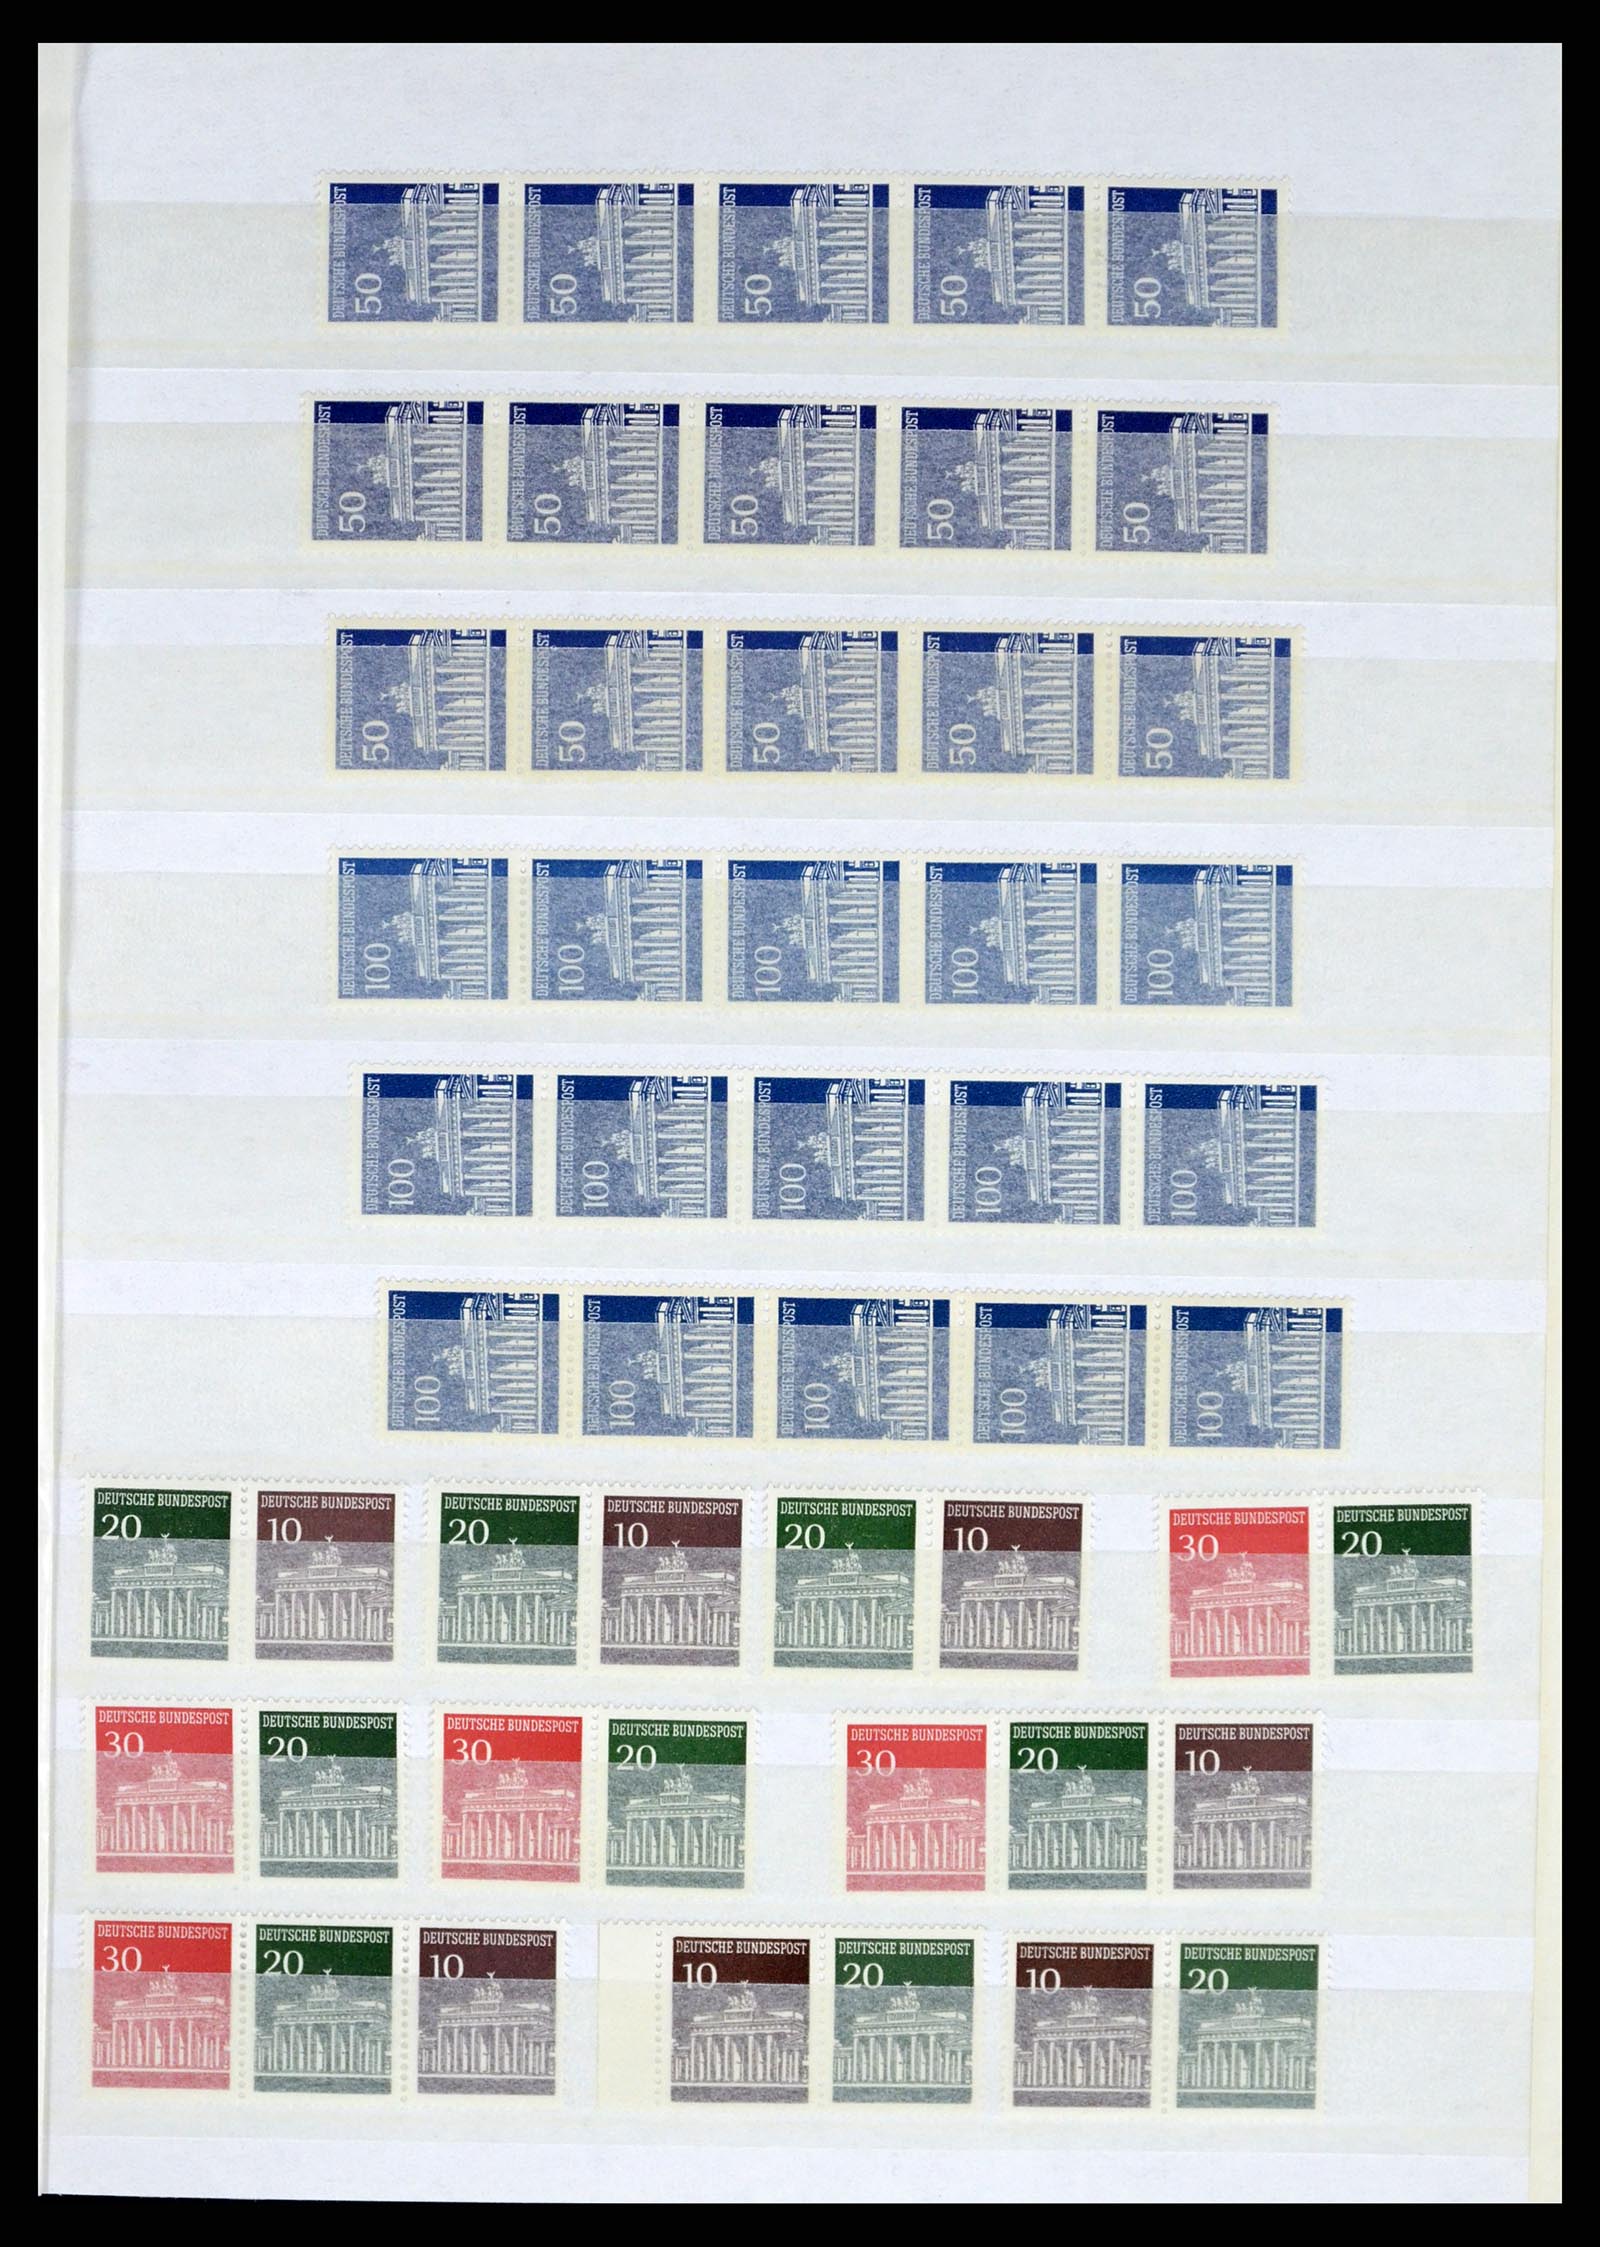 37354 057 - Stamp collection 37354 Bundespost and Berlin 1955-2000.